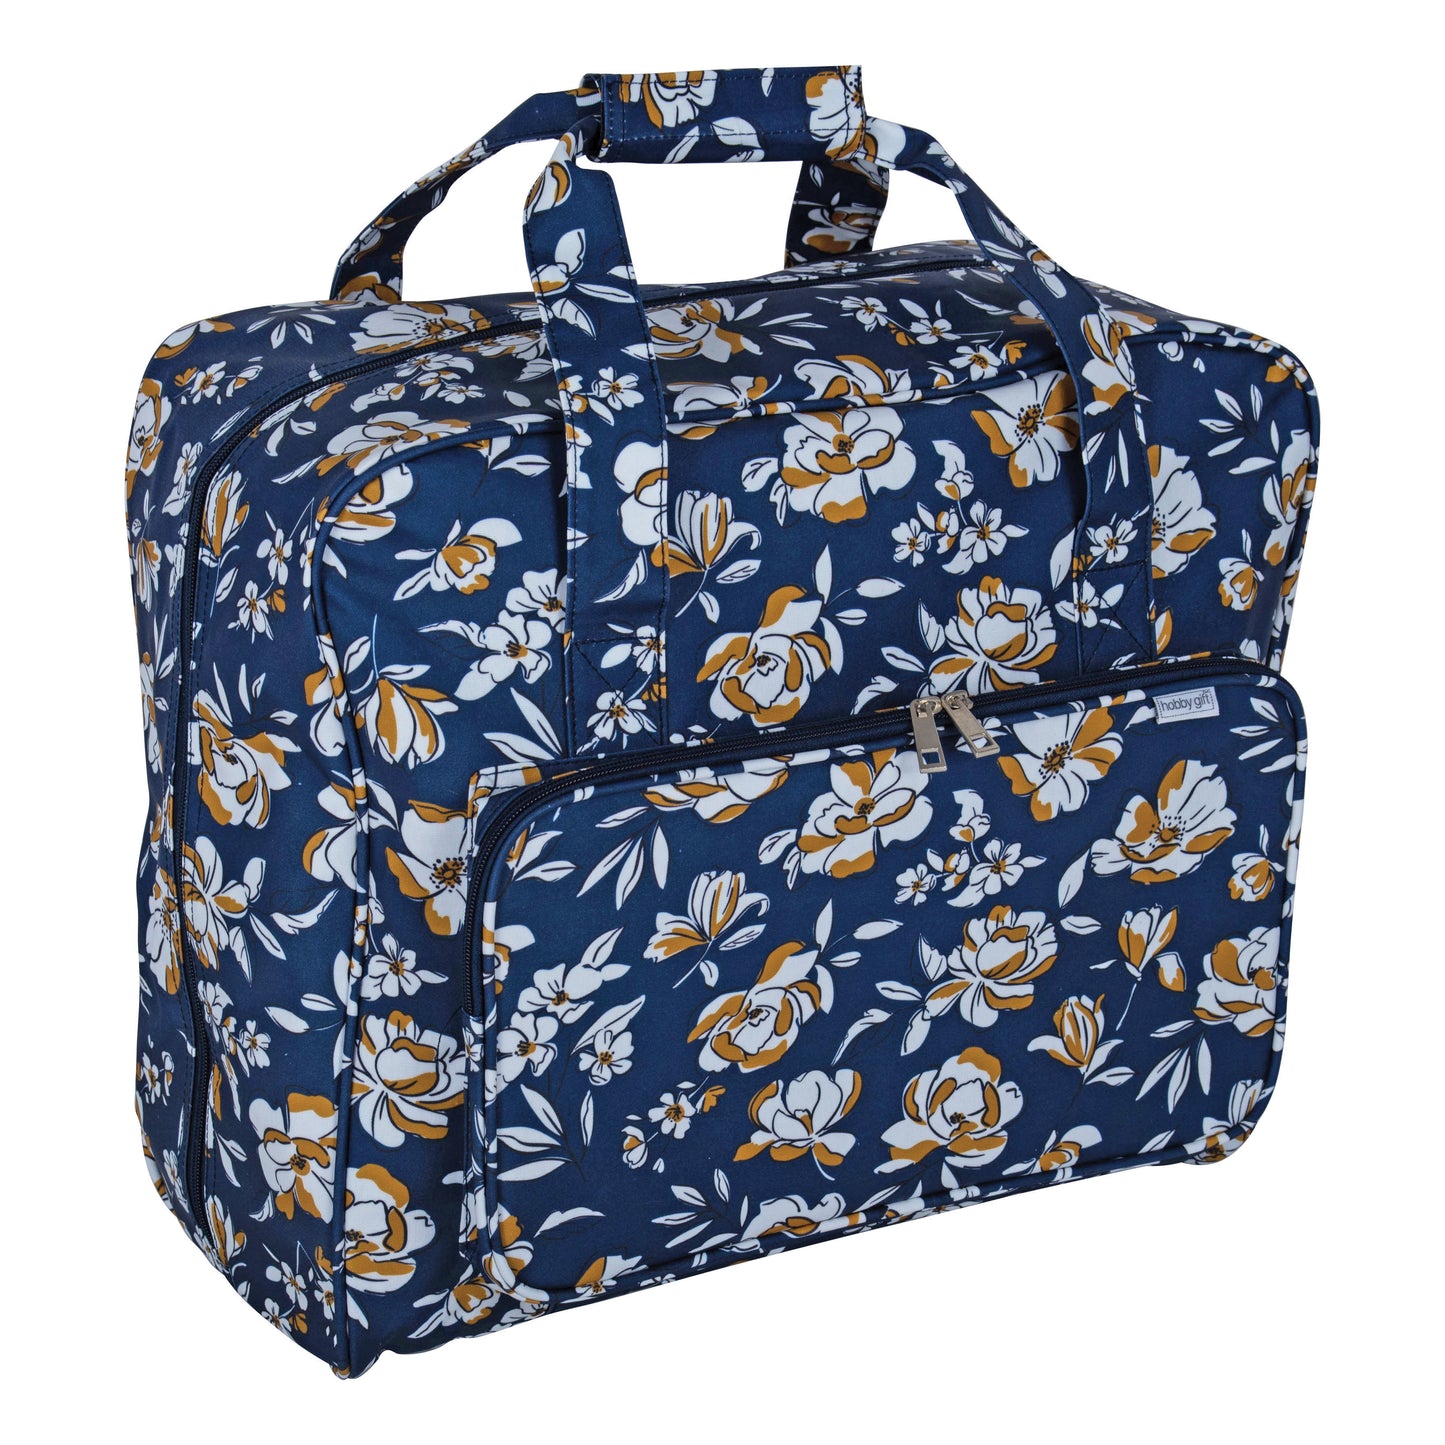 Hobby Gift Sewing Machine Bag Autumn Floral